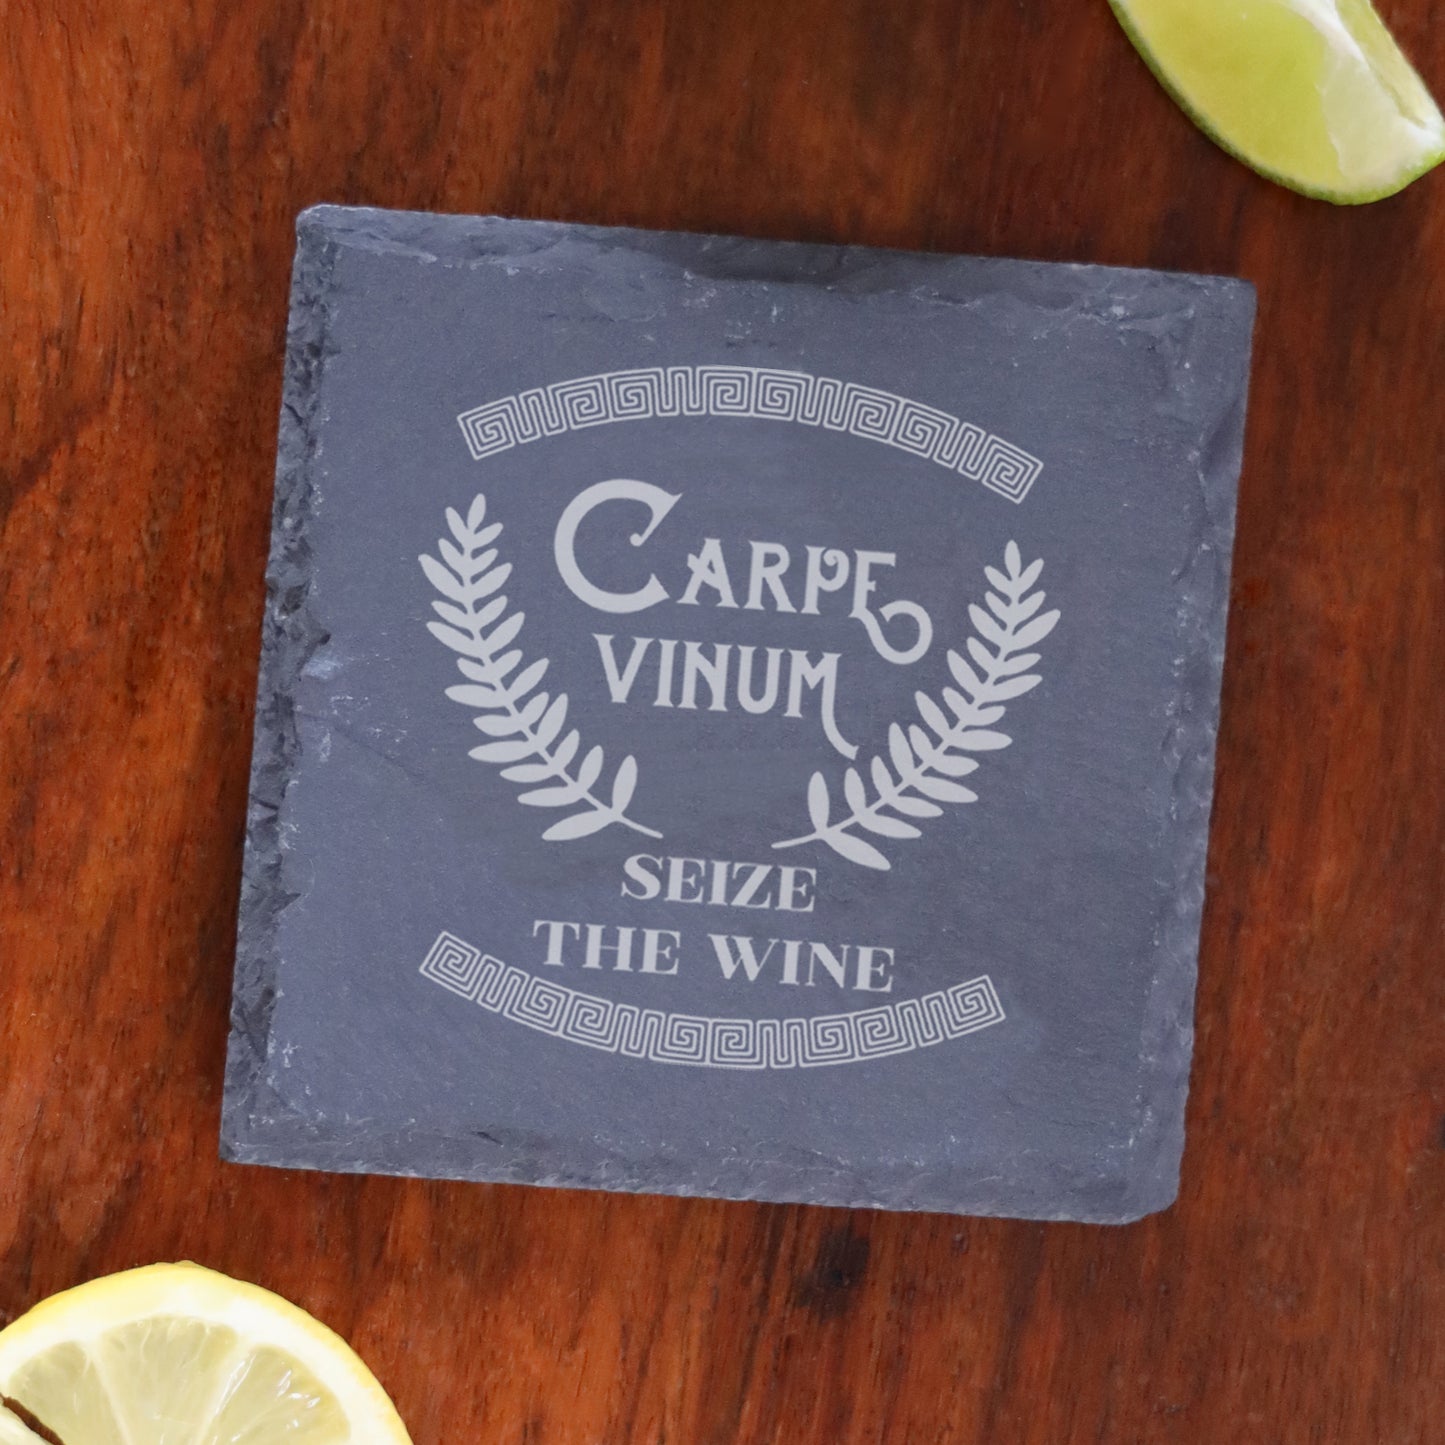 Funny Engraved "Carpe Vinum Seize The Wine" Novelty Wine Glass and/or Coaster Set  - Always Looking Good -   